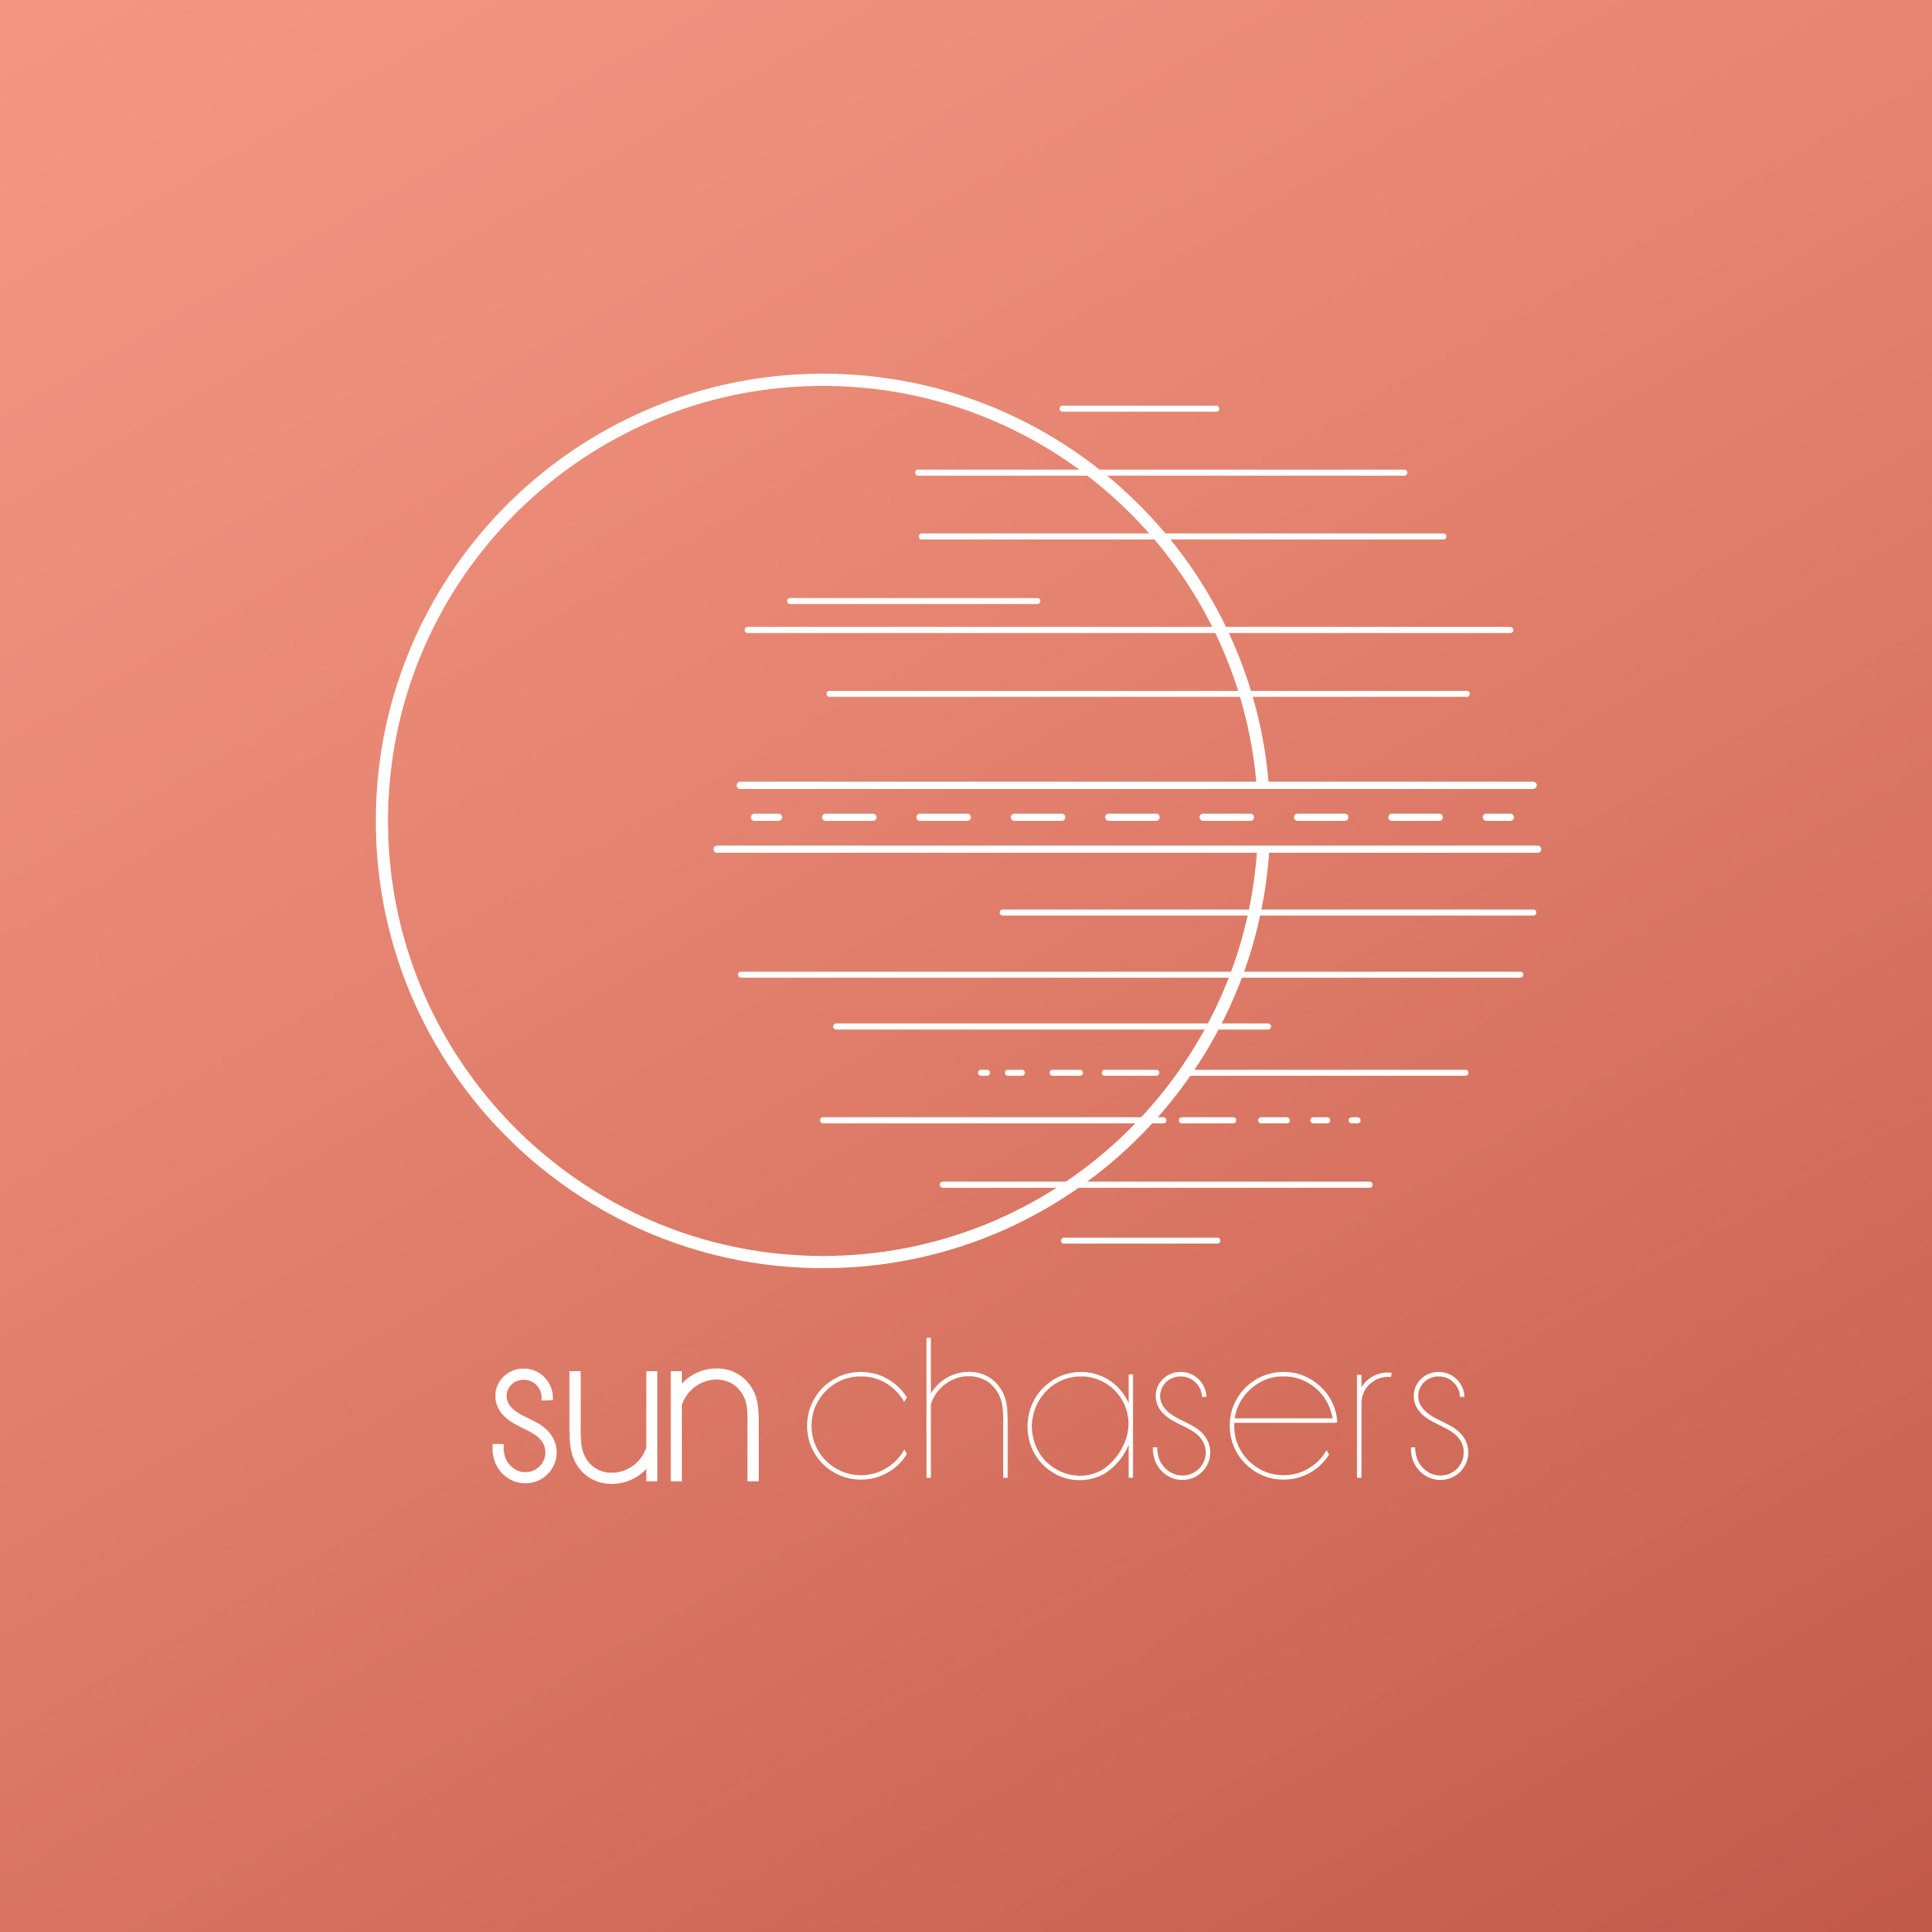 Sun Chasers